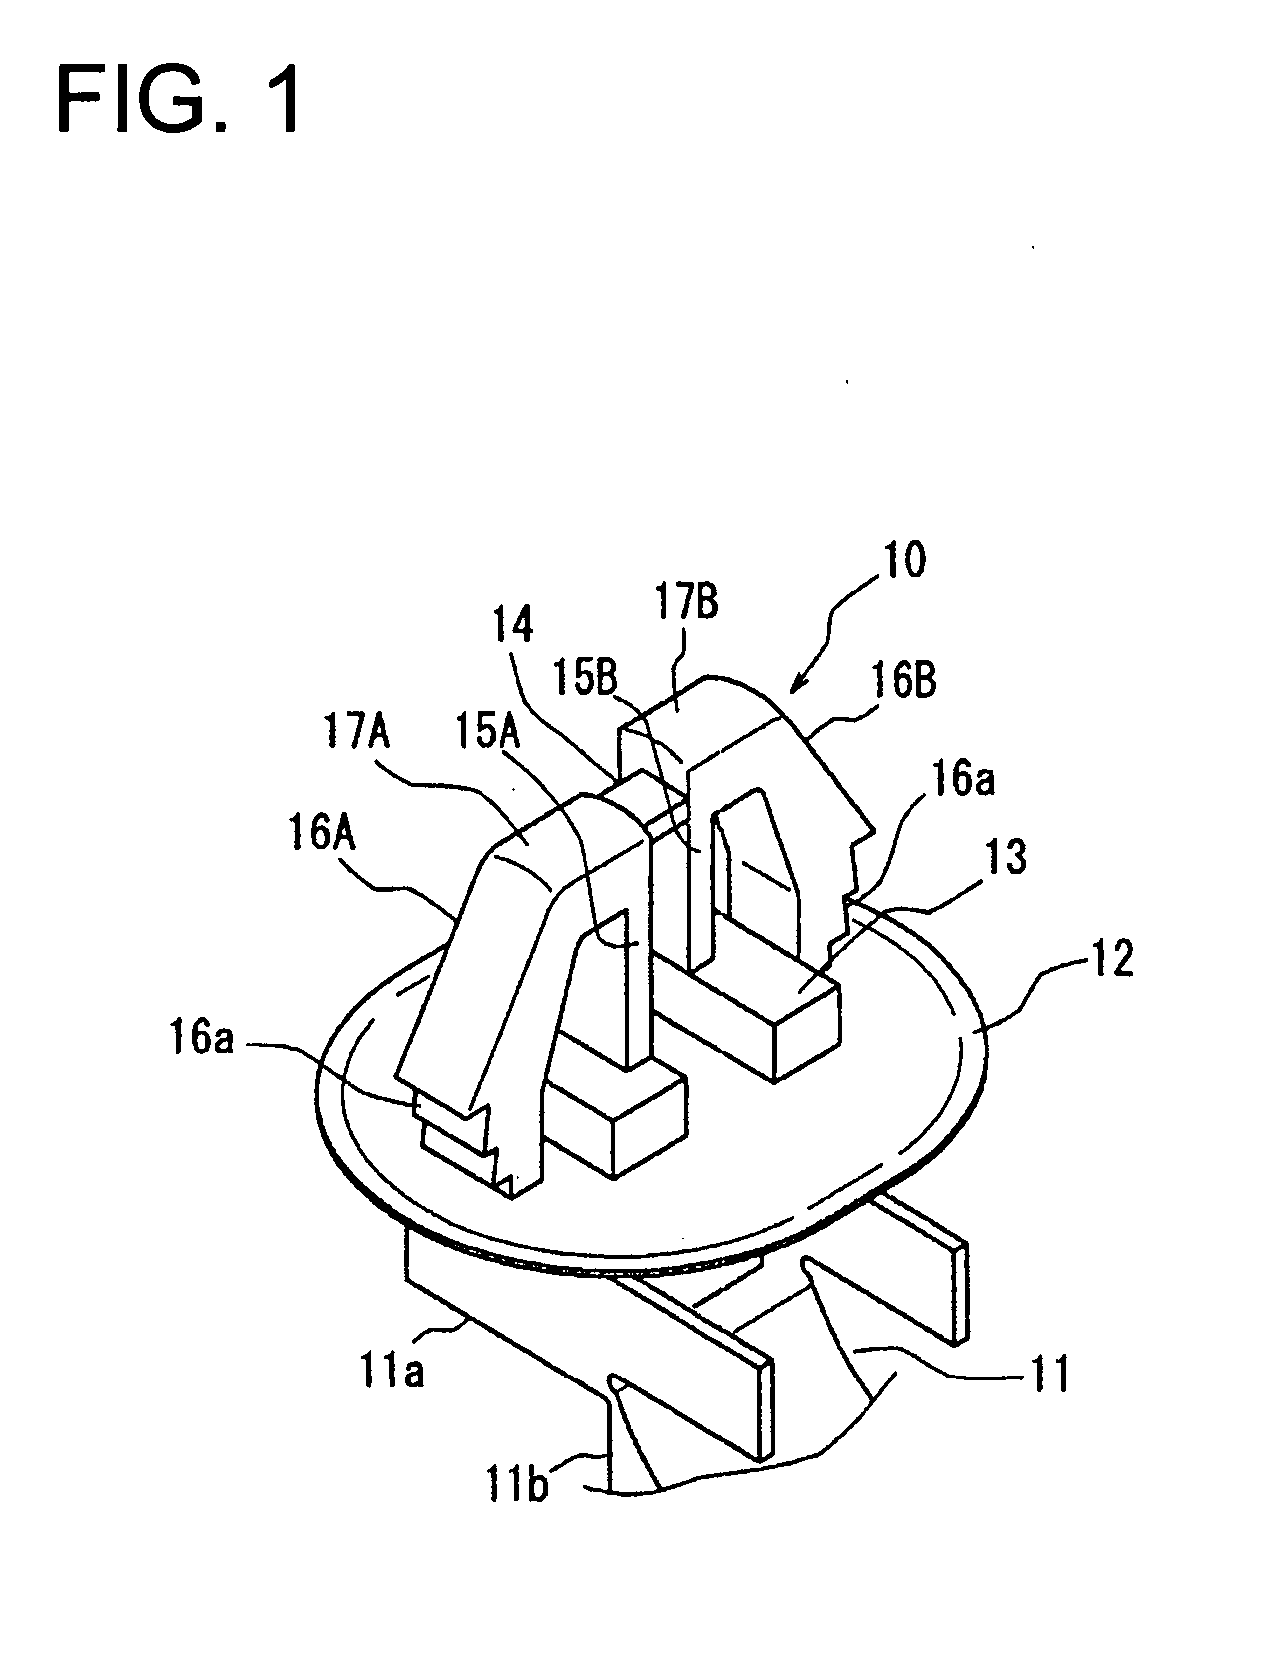 Clamp for use in wire harness